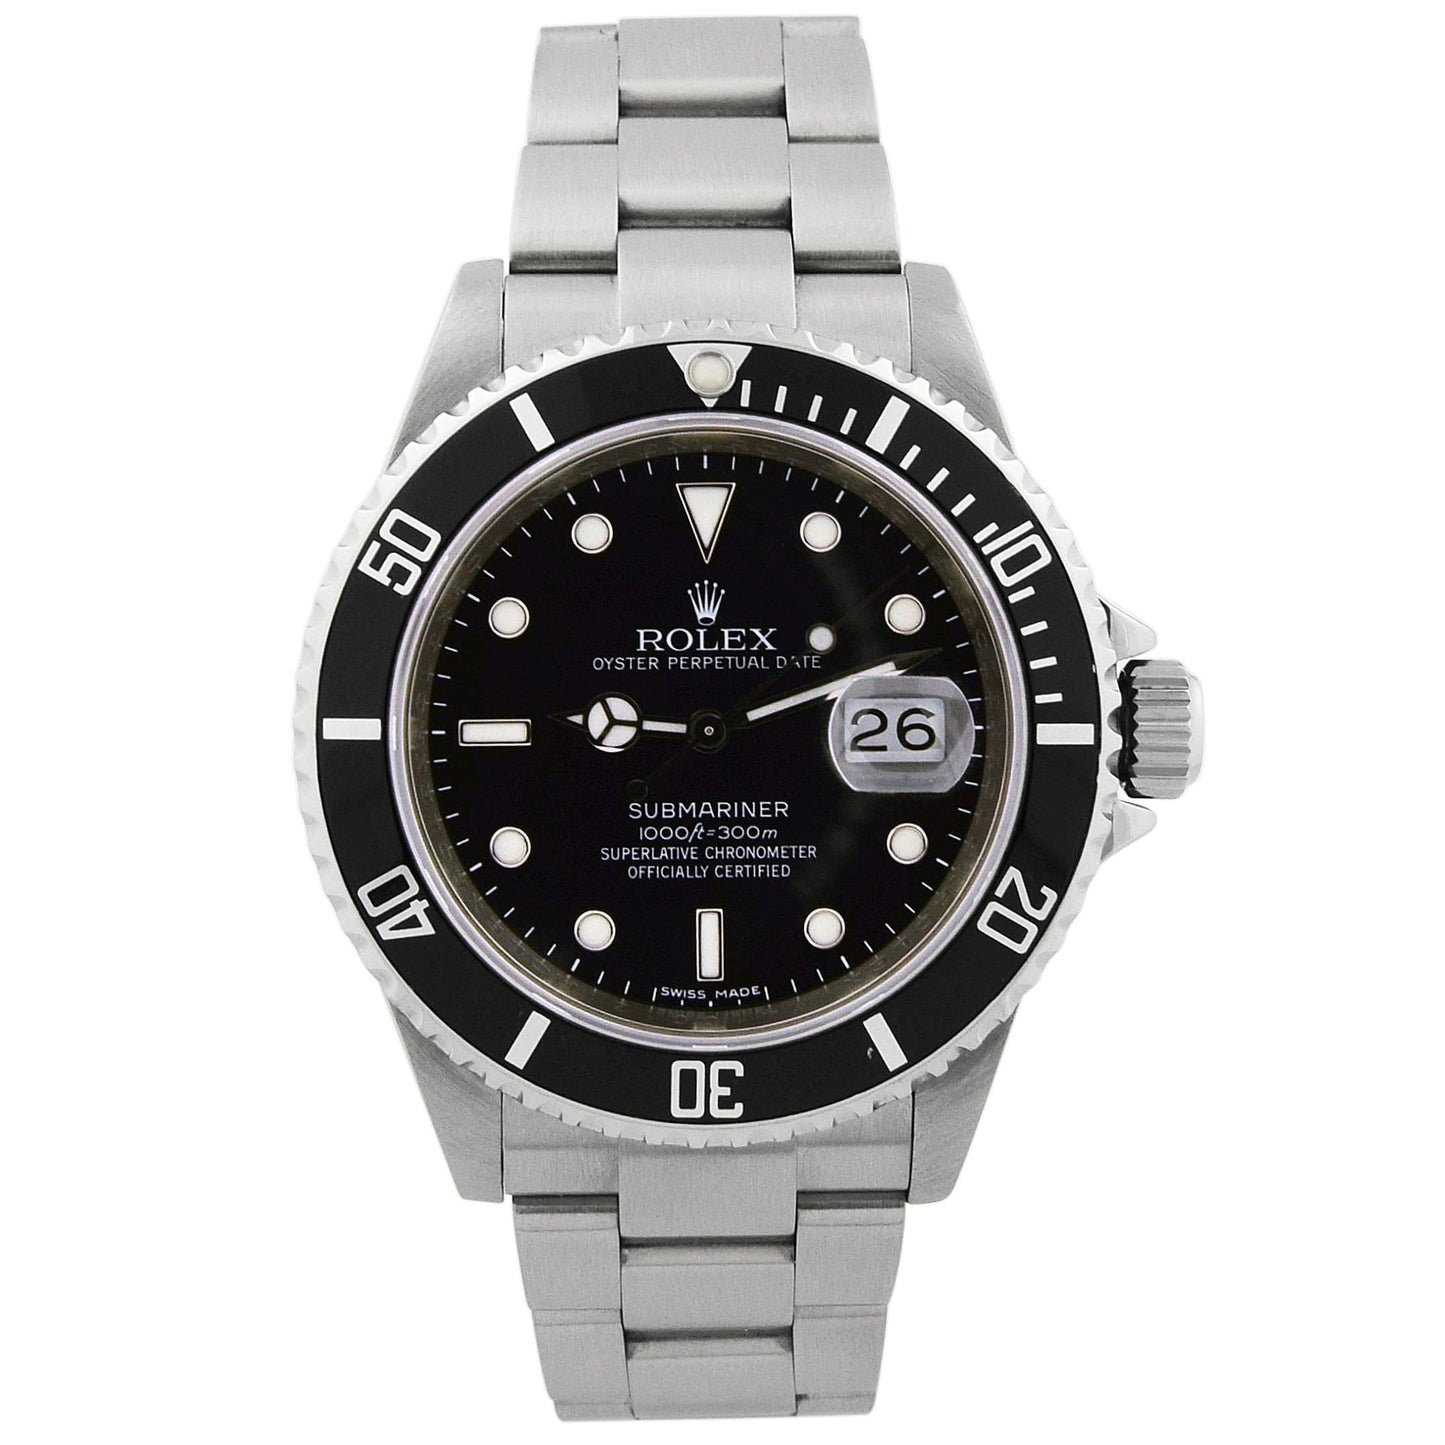 Rolex Men's Submariner Date Stainless Steel 40mm Black Dot Dial Watch Reference #: 16610 - Happy Jewelers Fine Jewelry Lifetime Warranty